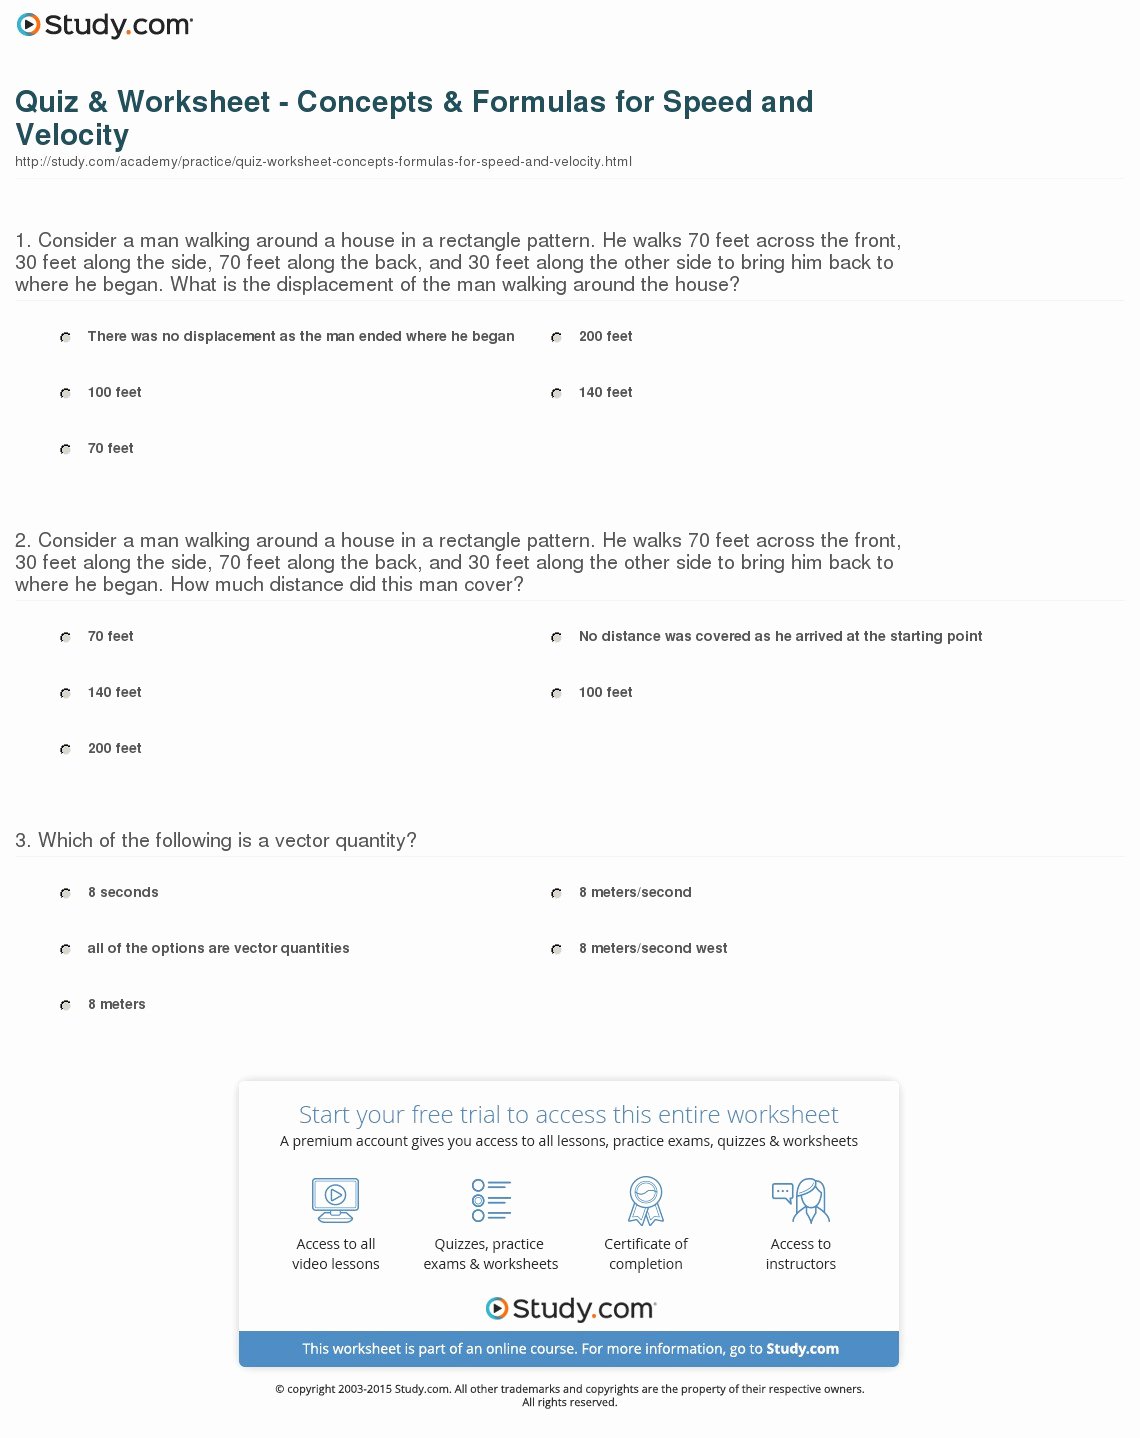 Speed and Velocity Worksheet Answers Lovely Quiz & Worksheet Concepts & formulas for Speed and